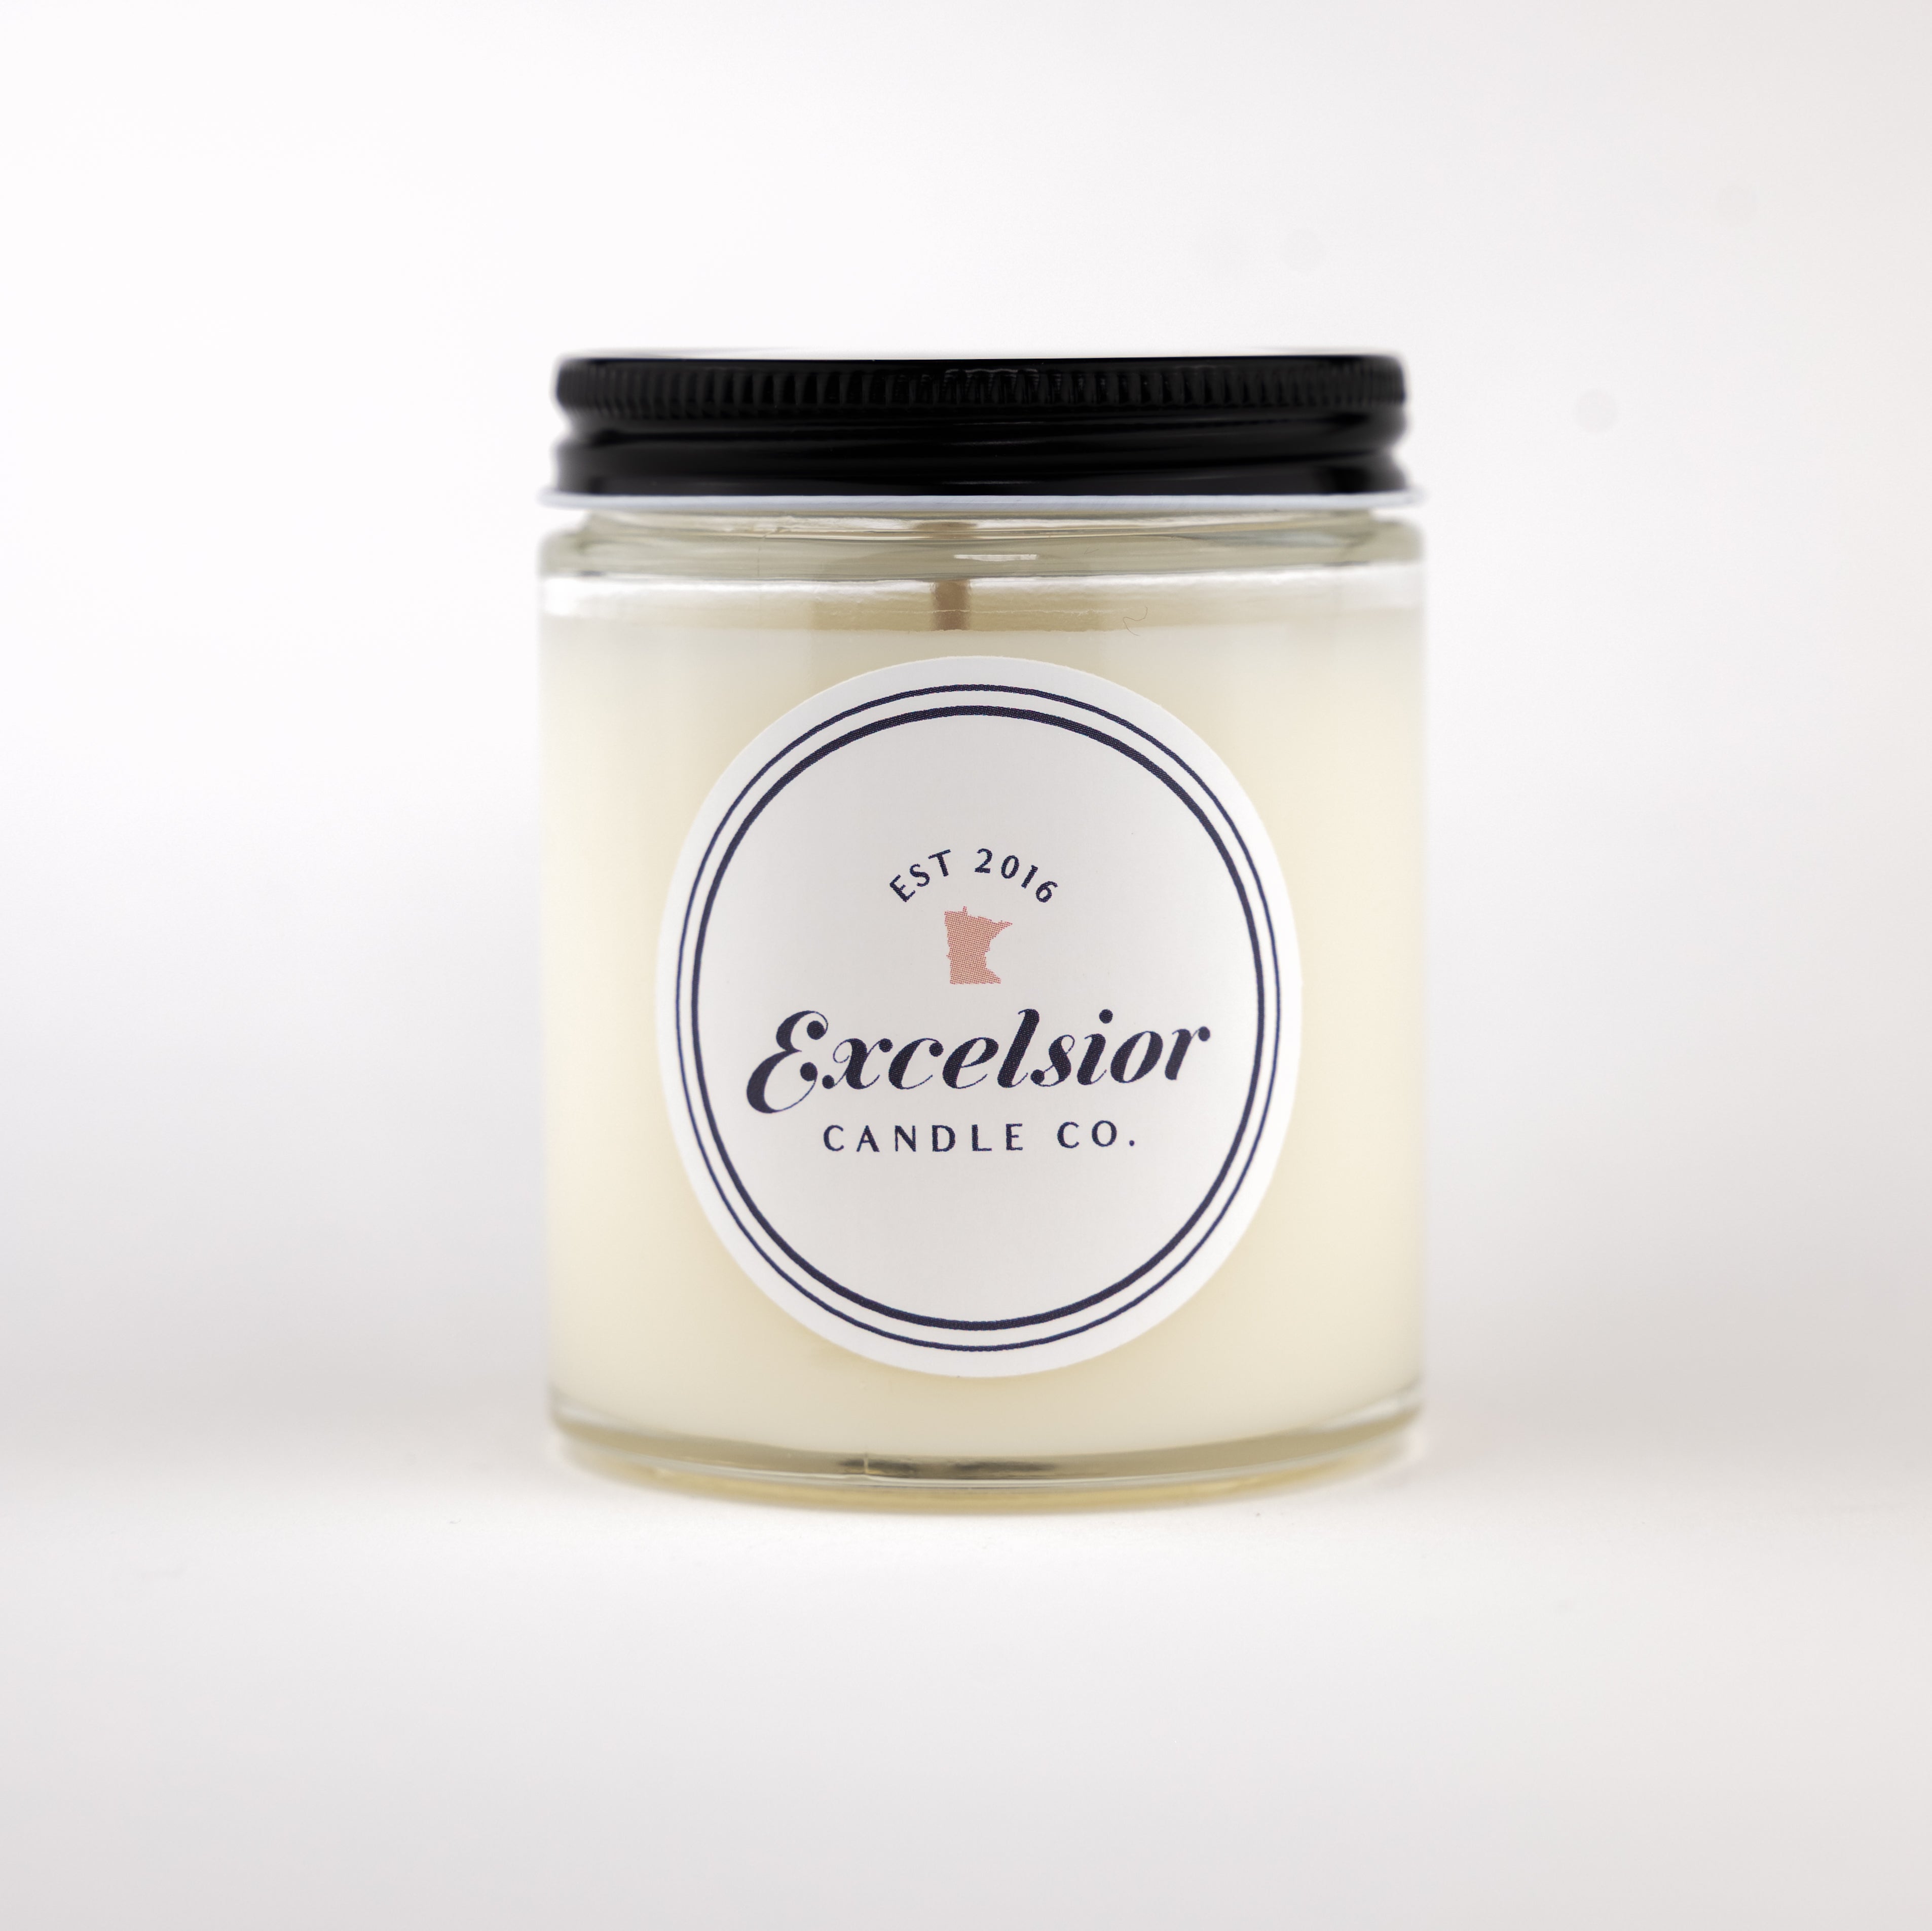 Downtown Loft Soy Candle